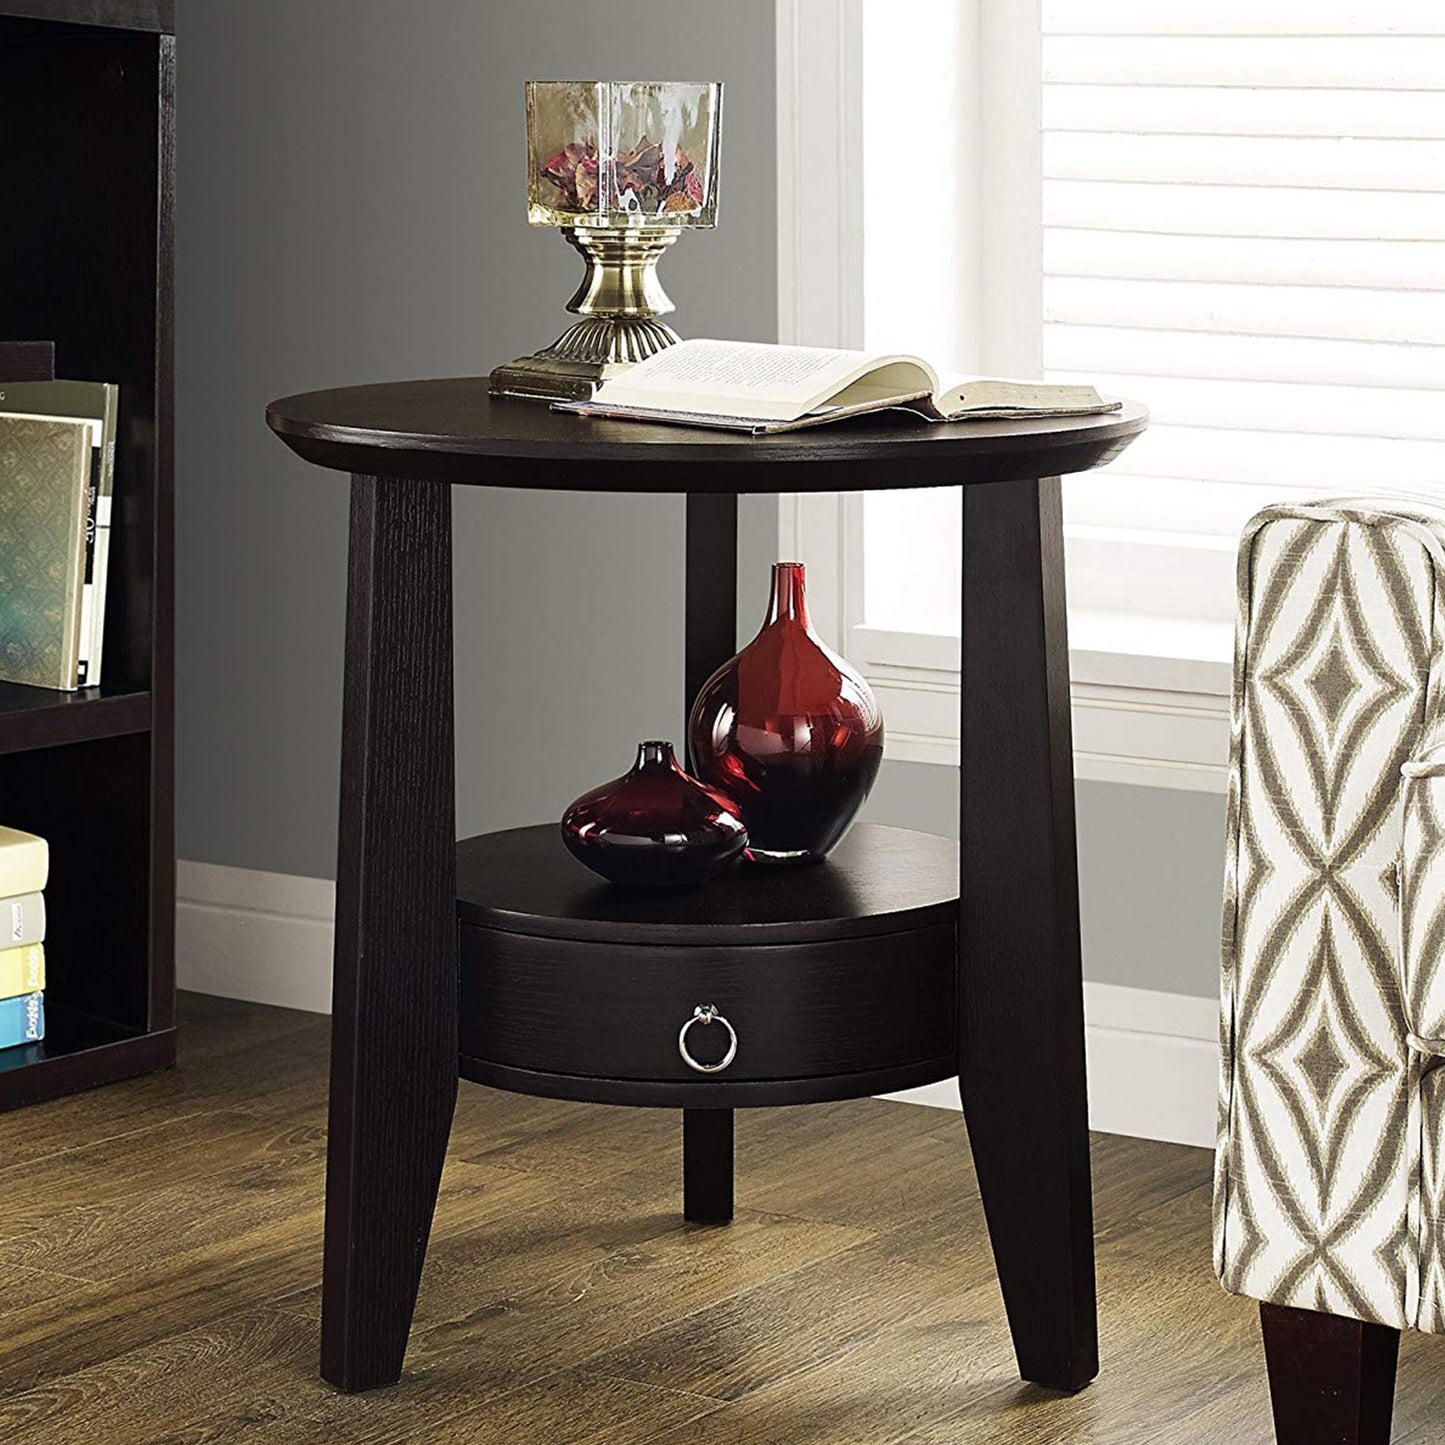 23.5" x 23.5" x 24" Cappuccino 1 Drawer Accent Table